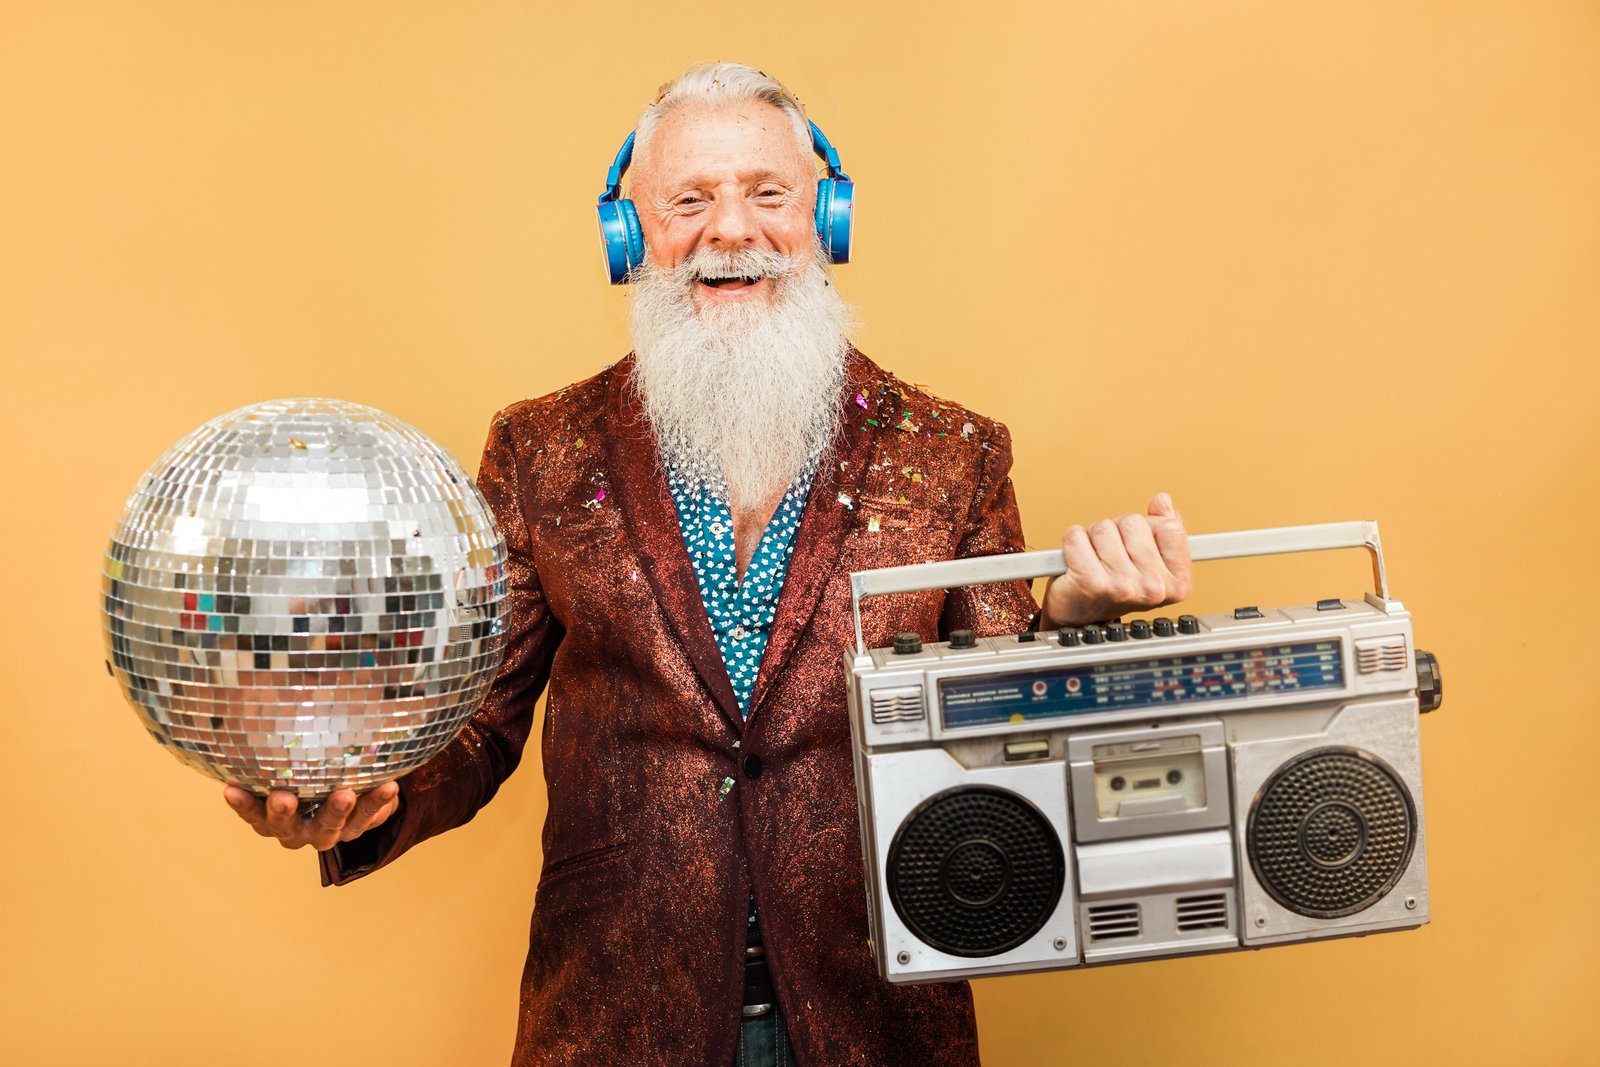 Boomer hipster with headphones, disco ball and boom box